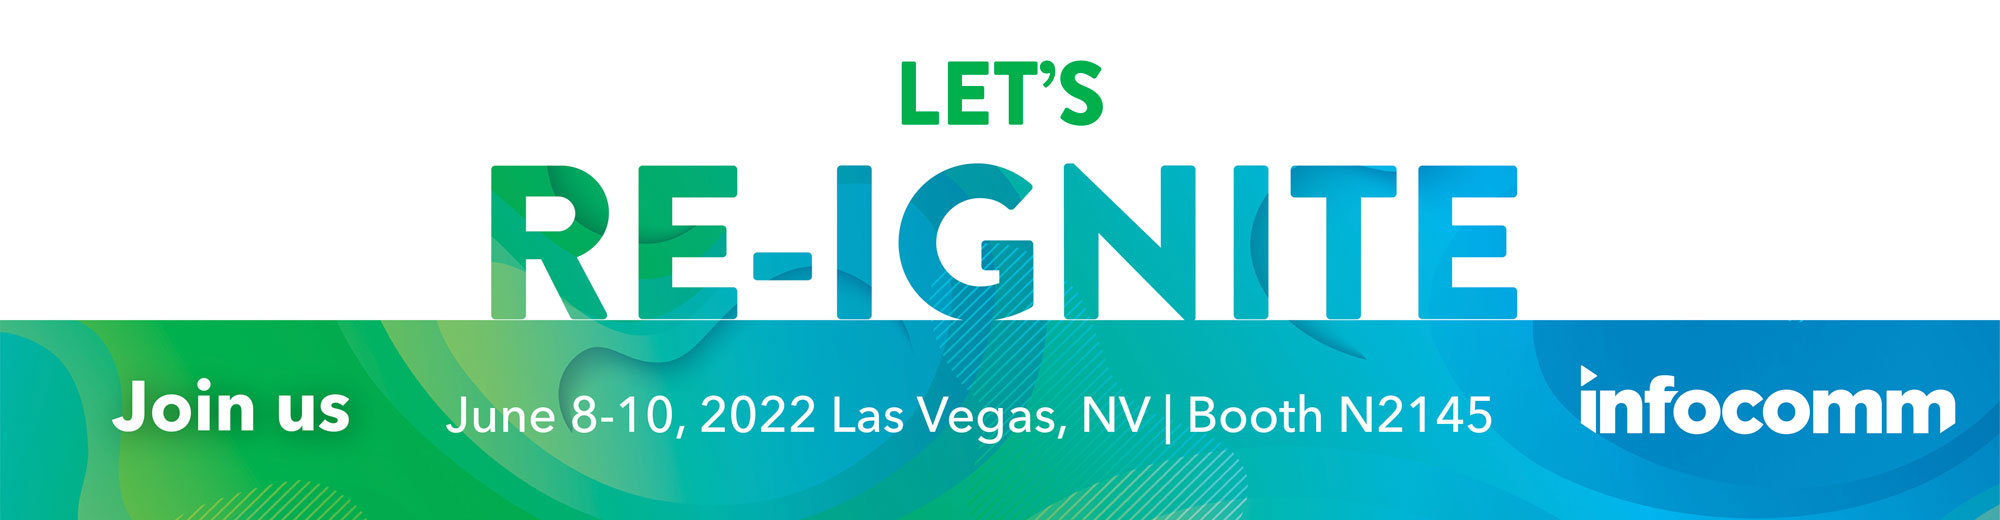 Let's RE-Ignite - Join us June 8-10 at Booth N2145